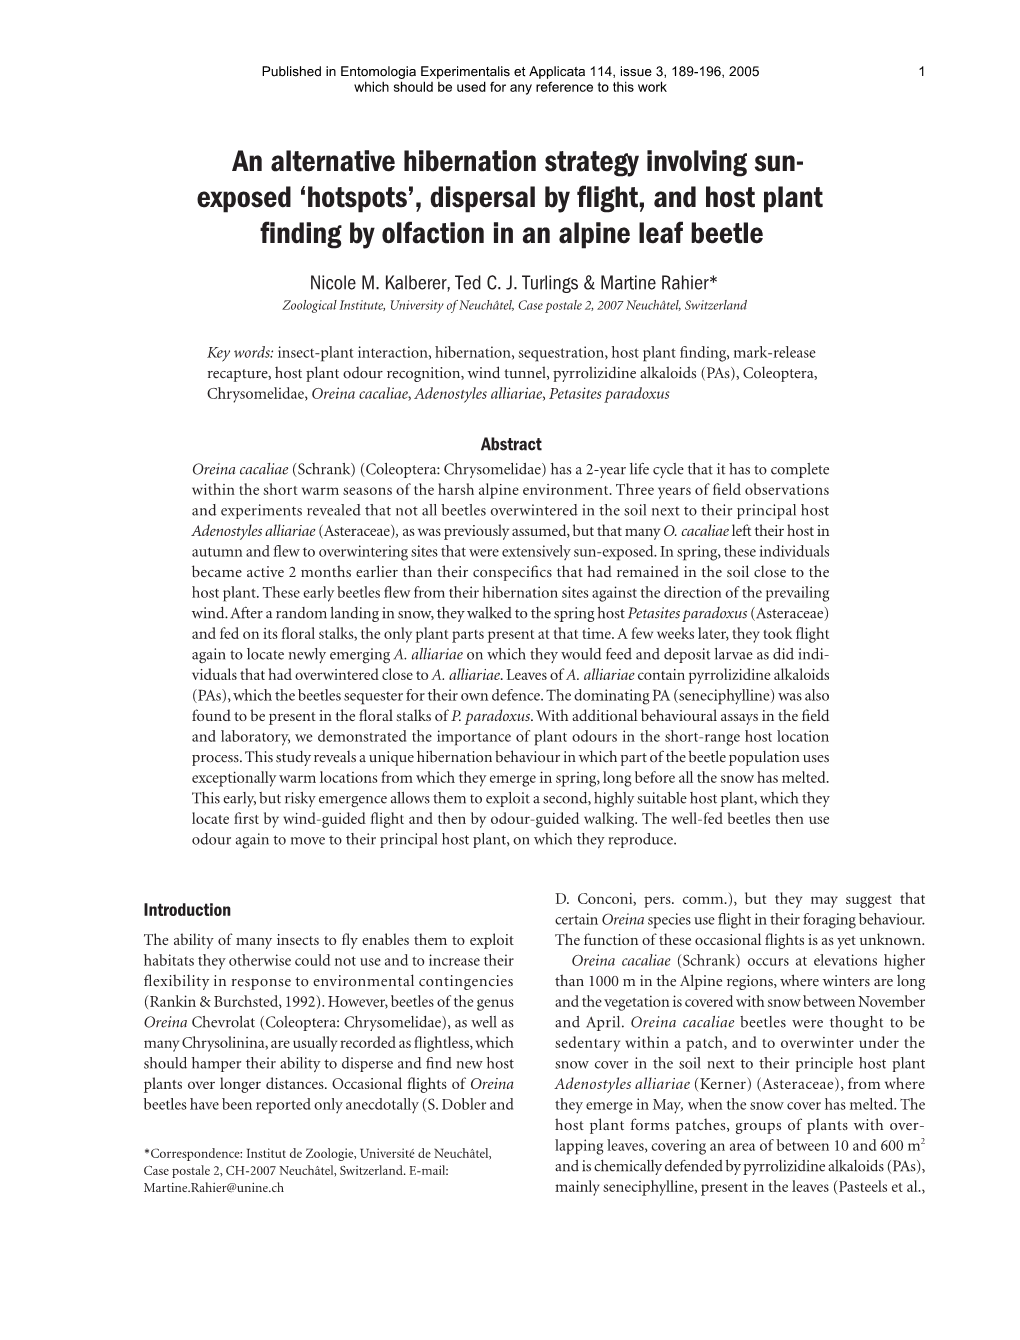 An Alternative Hibernation Strategy Involving Sun- Exposed ‘Hotspots’, Dispersal by Flight, and Host Plant Finding by Olfaction in an Alpine Leaf Beetle